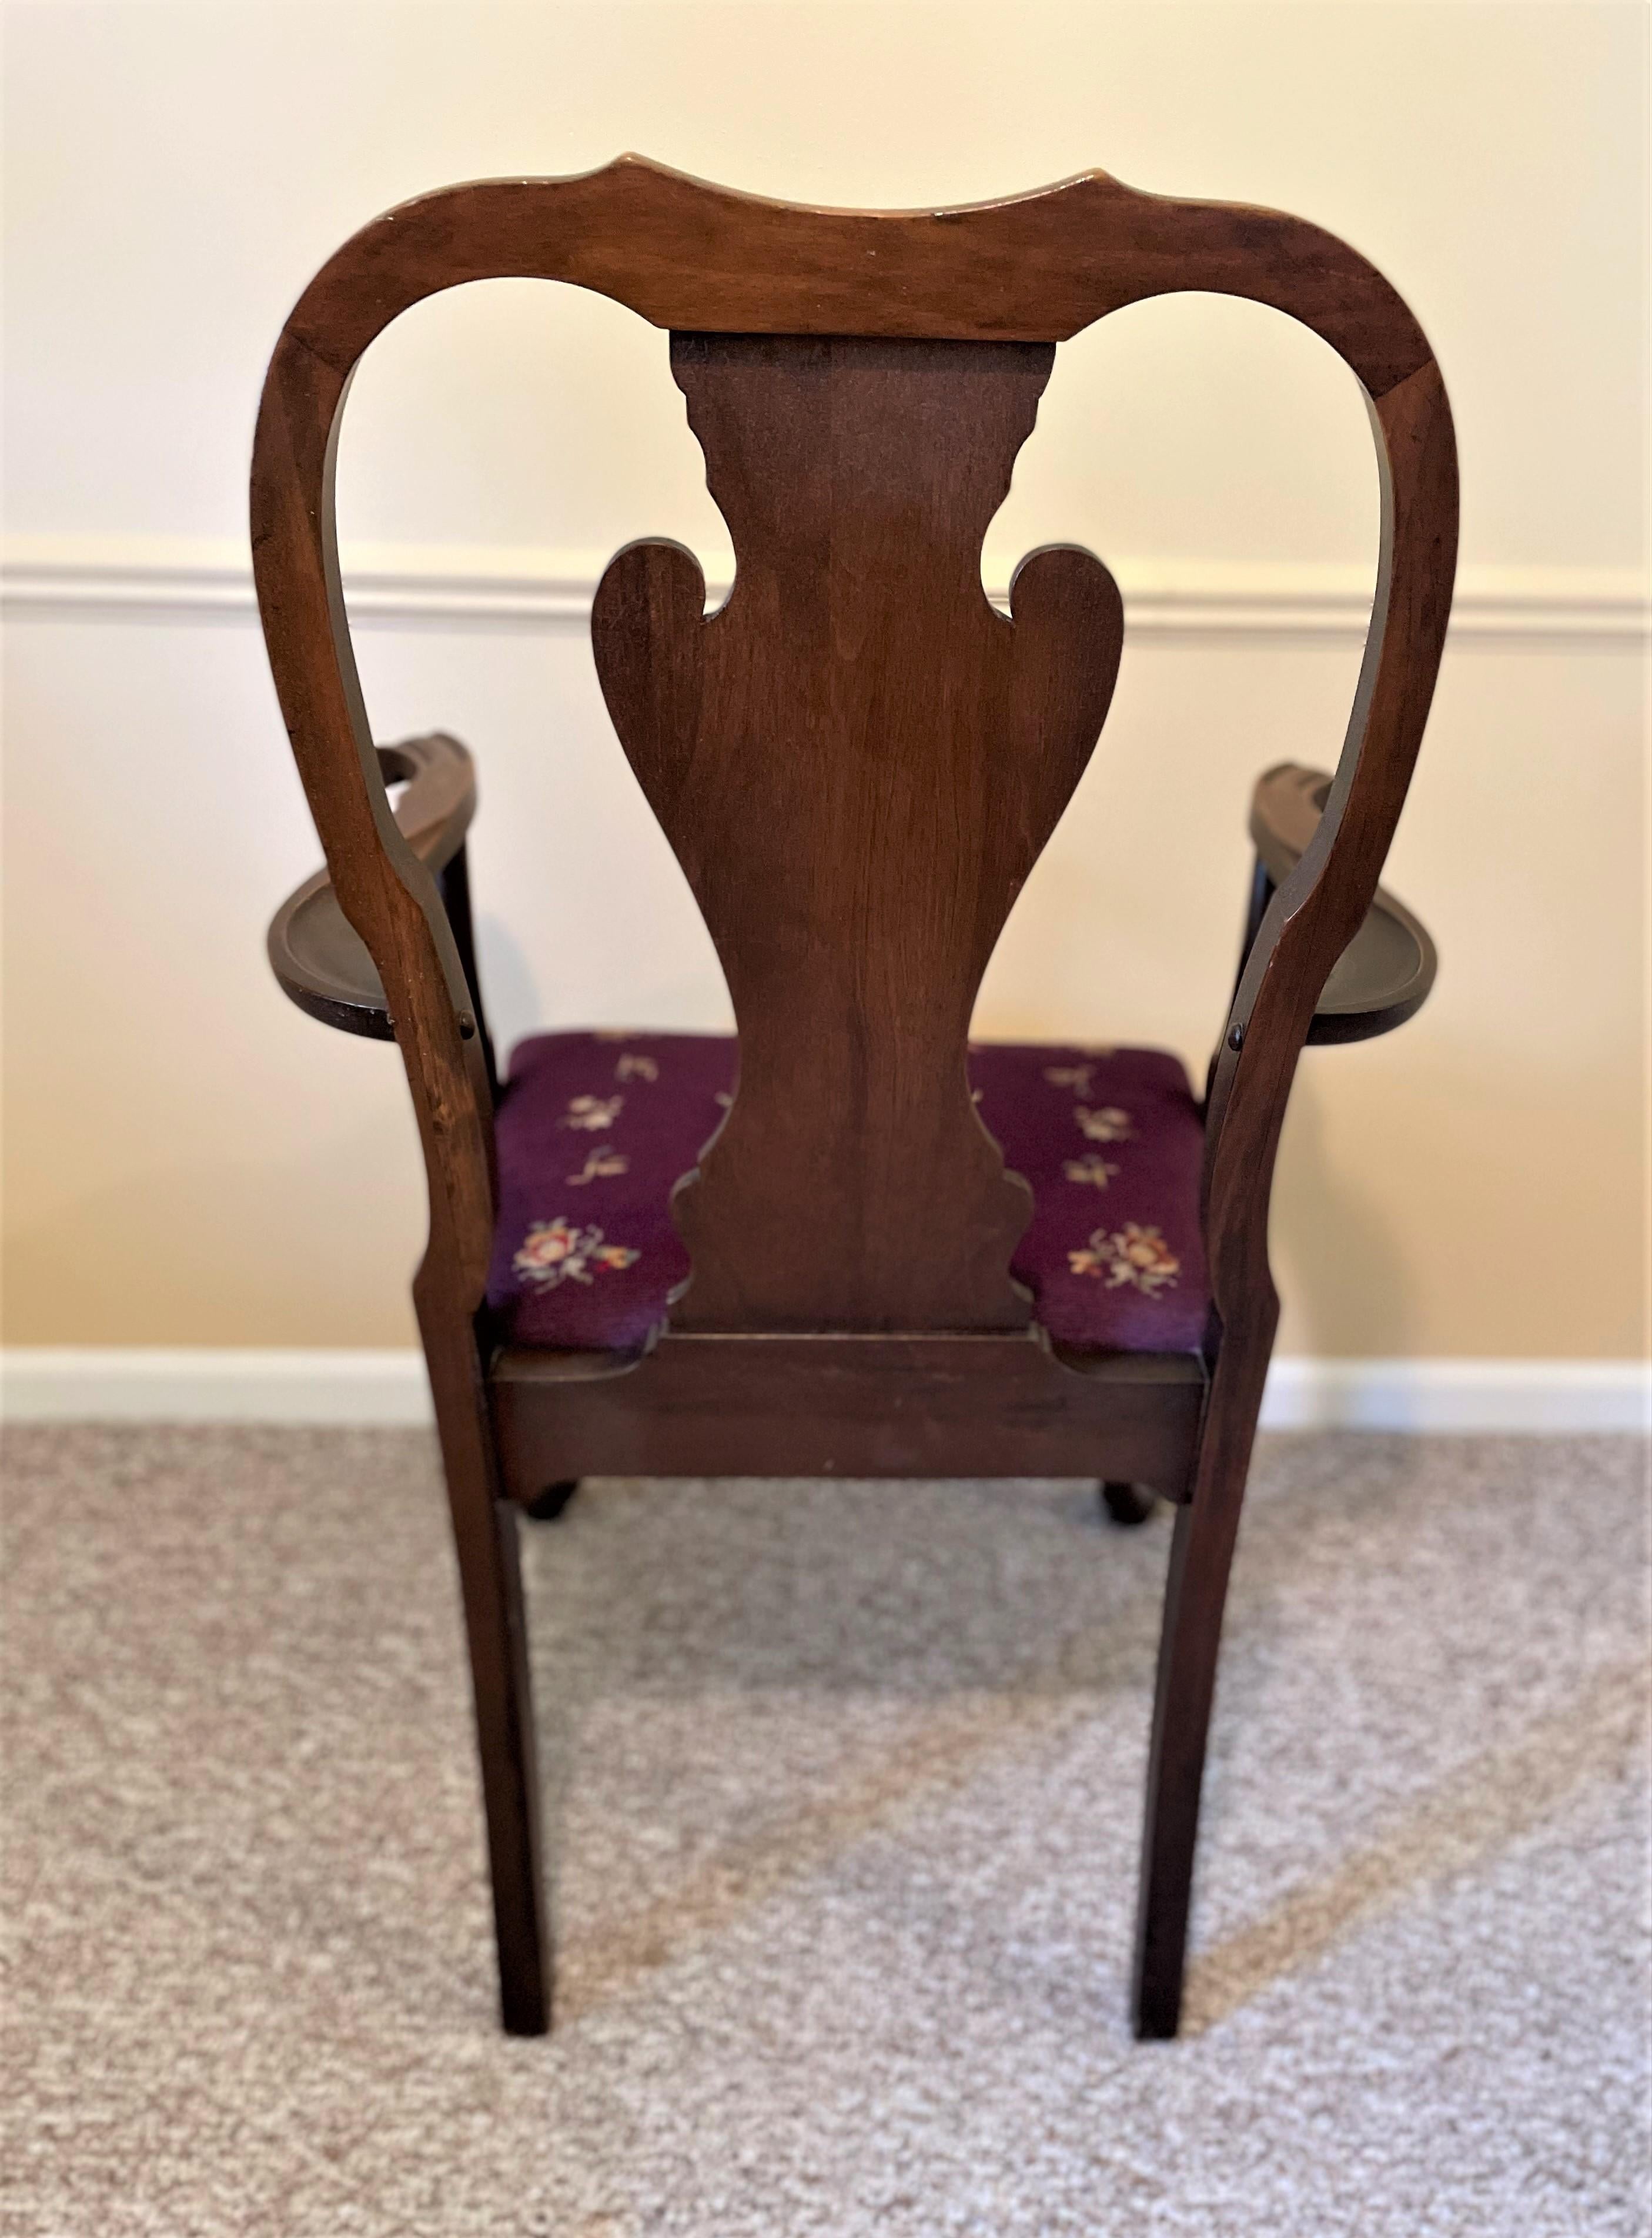 1930s Solid Walnut Armchair with Aubergine Color Needlepoint Seat In Excellent Condition For Sale In Austin, TX